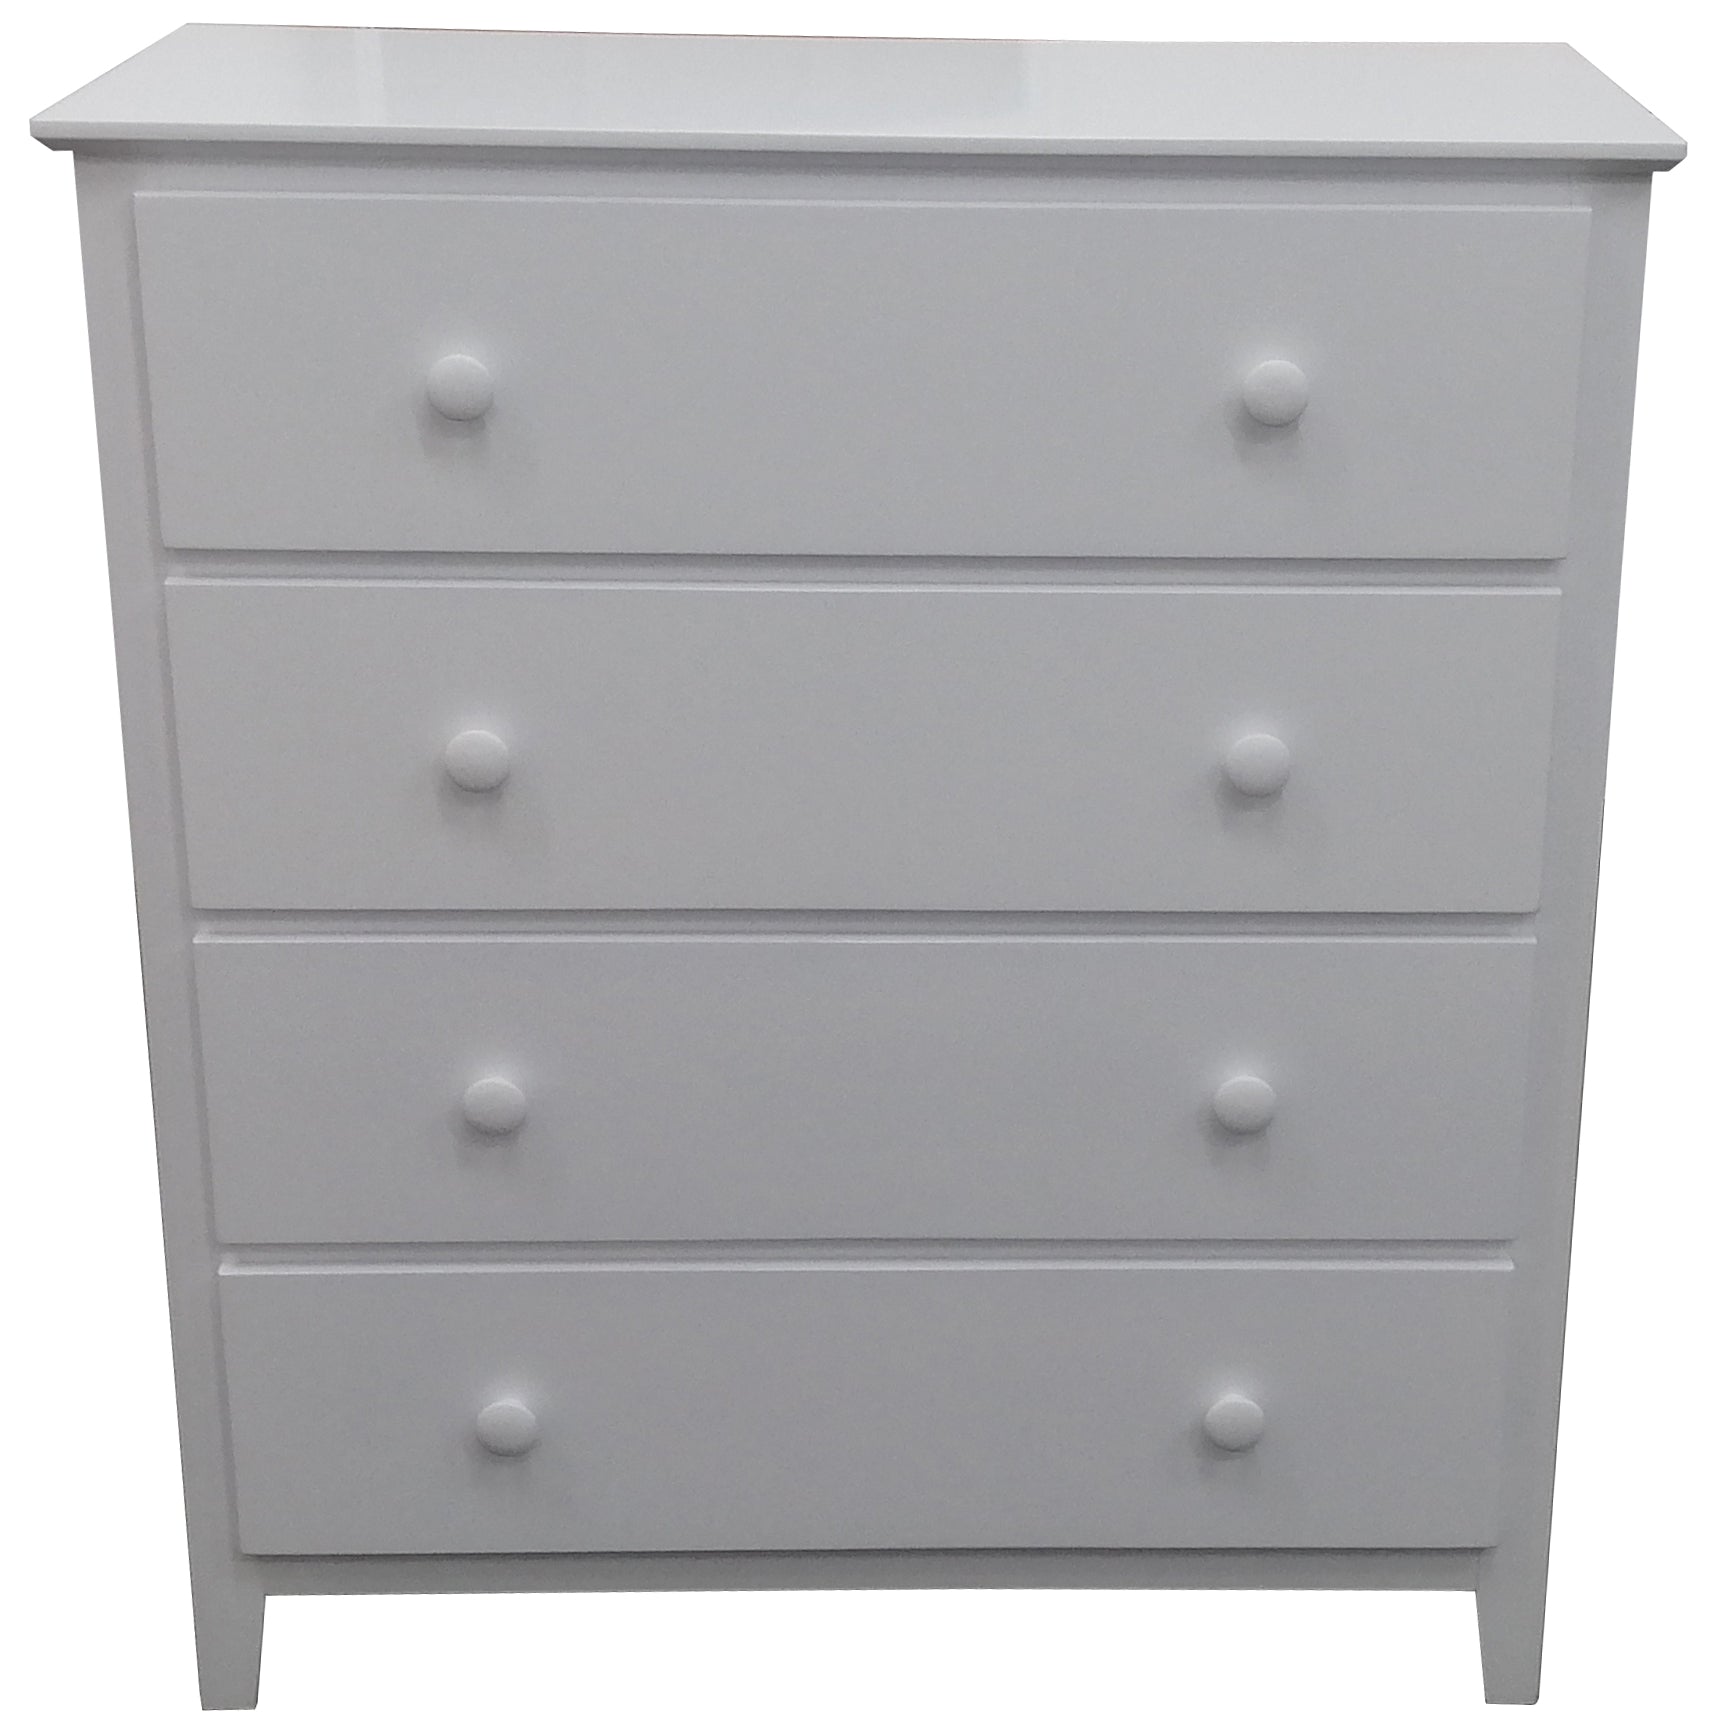 Tallboy 4 Chest of Drawers Solid Rubber Wood Bed Storage Cabinet -White